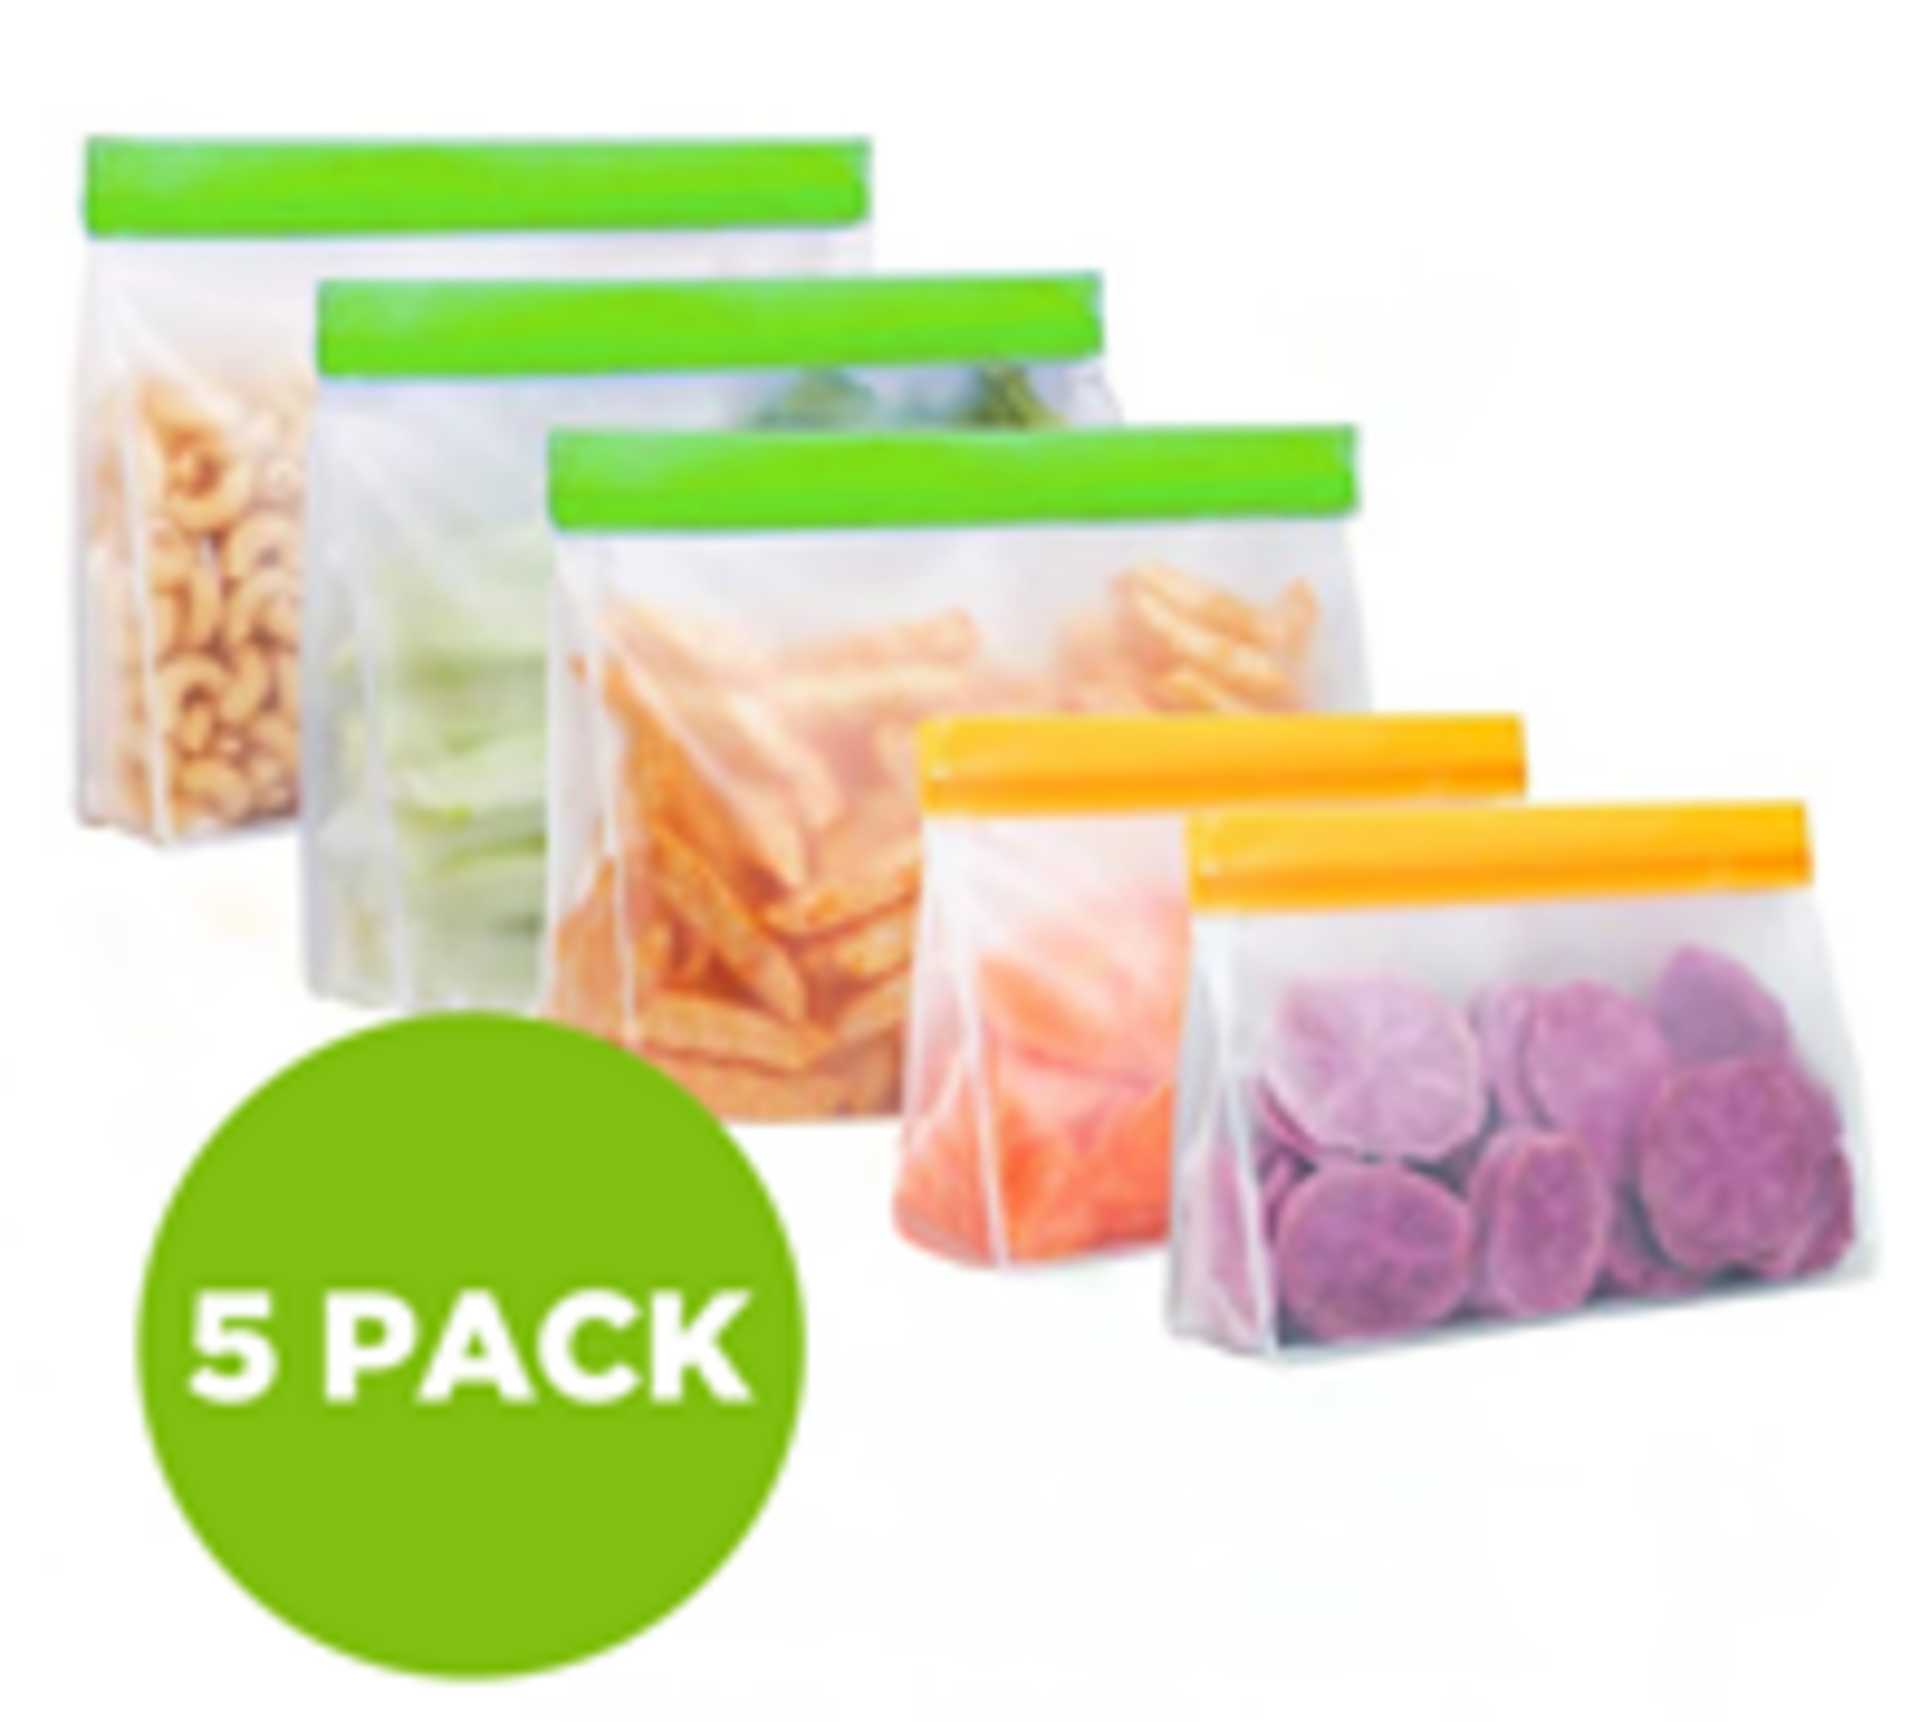 TRADE LOT TO CONTAIN 92x BRAND NEW Silicone Reusable Stand Bottom Design Zipper Food Bags - 5